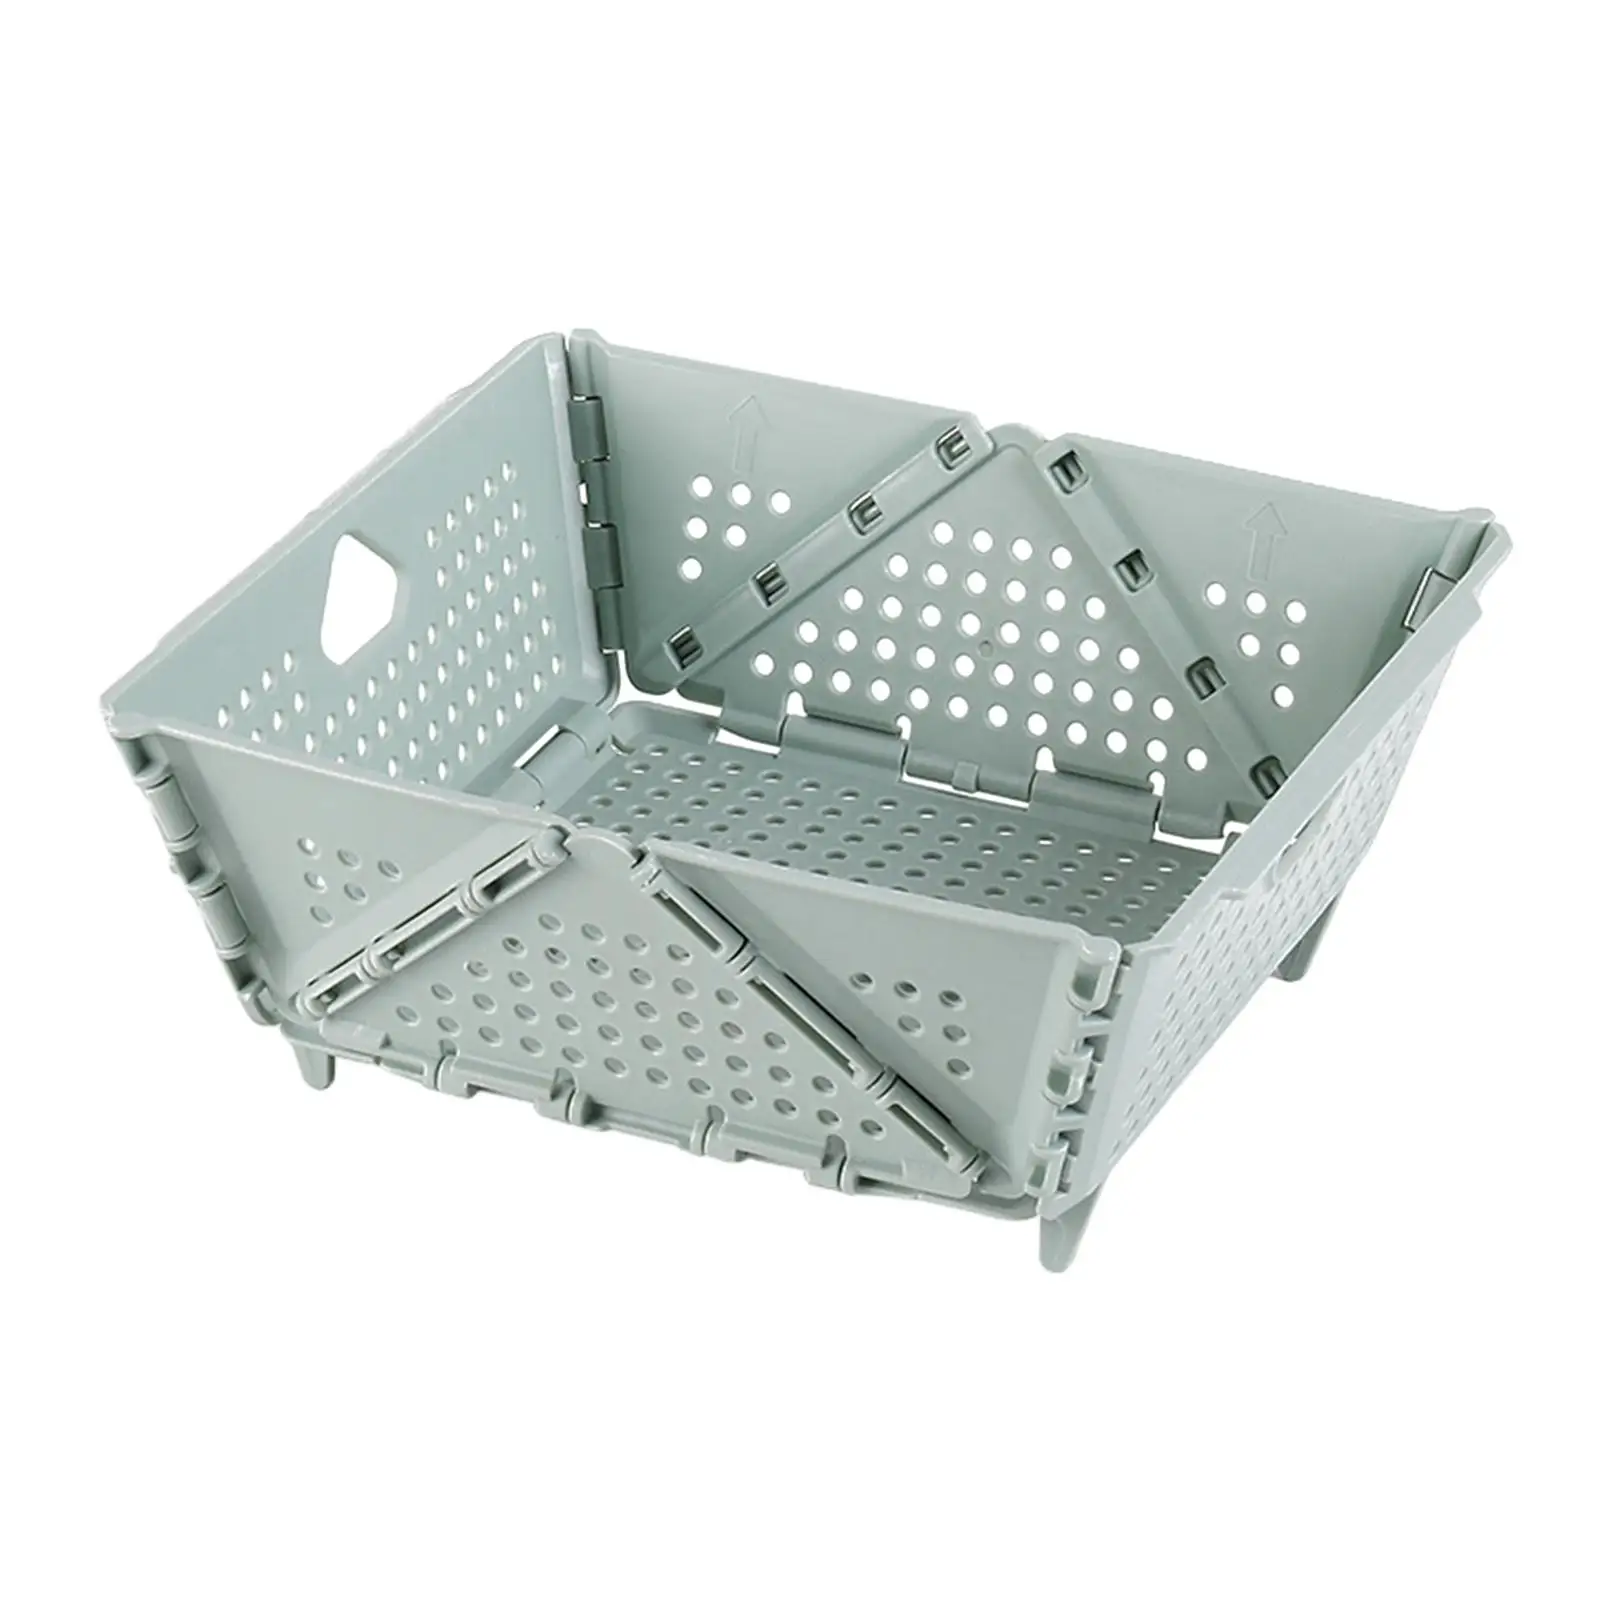 Small Folding Basket with Stand Base Multipurpose Foldable Drain Basket Collapsible Crates for Office Livingroom Kitchen Bedroom